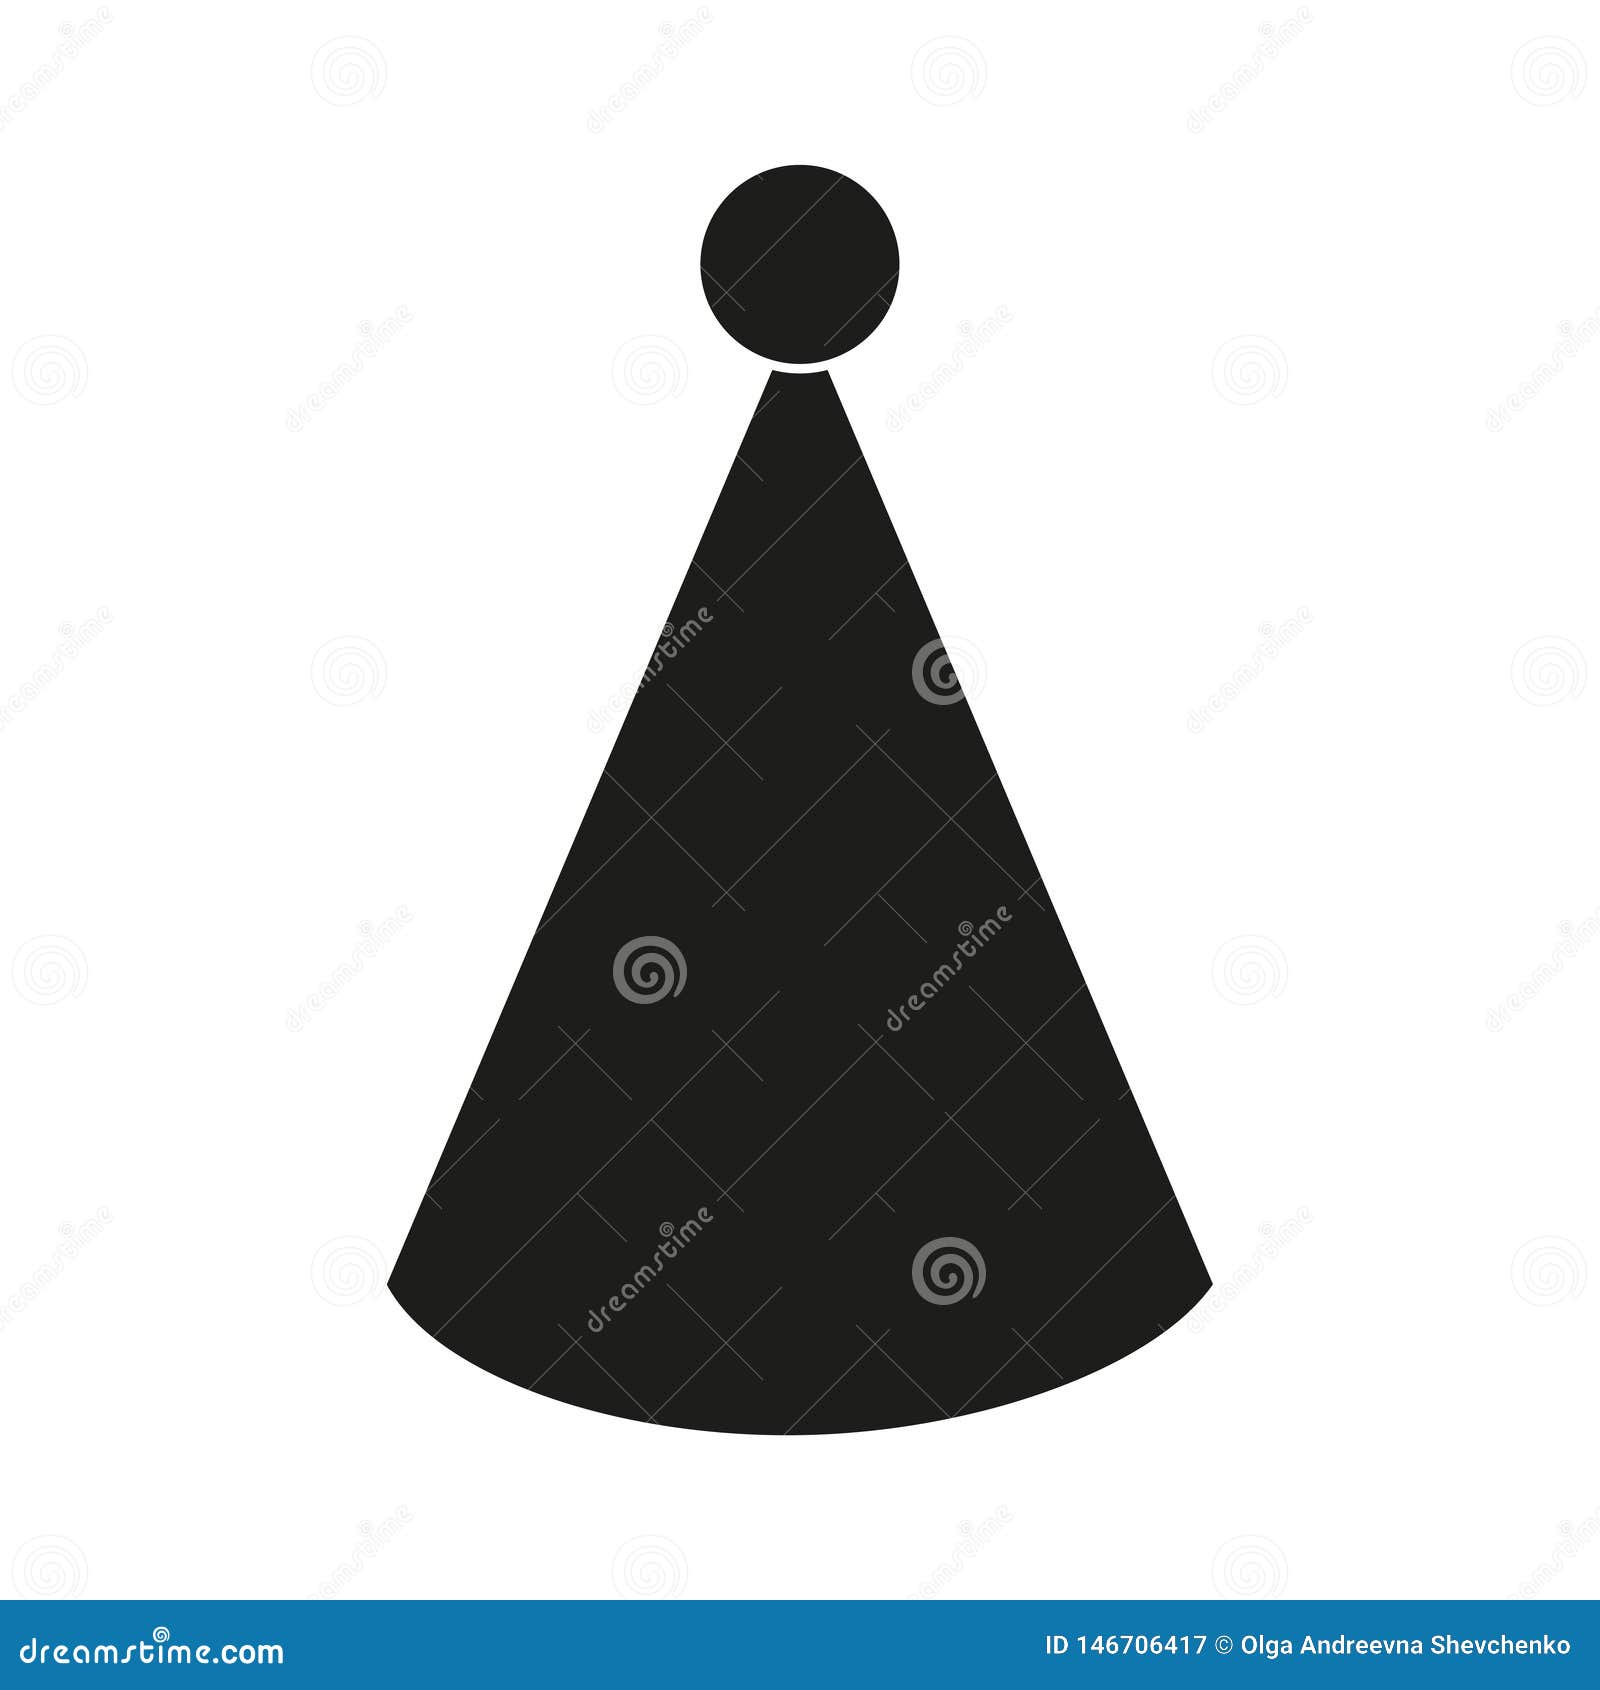 Download Black And White Party Hat Silhouette Stock Vector ...